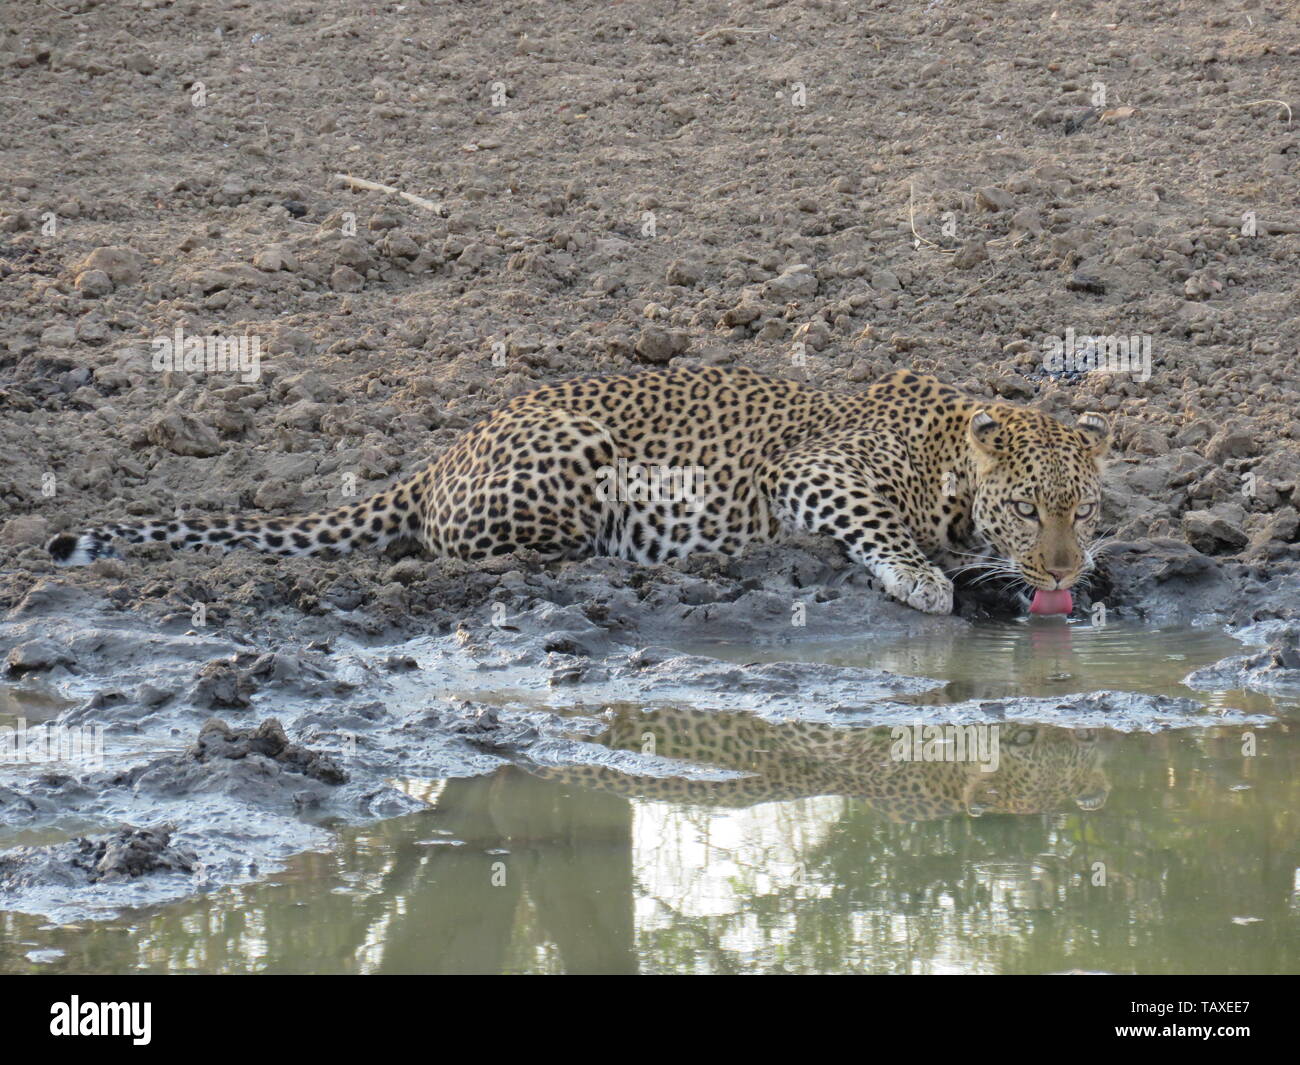 A beautiful leopard looking menacingly at the camera whilst drinking from the waterhole complete with reflection, Karongwe Game Reserve, South Africa. Stock Photo